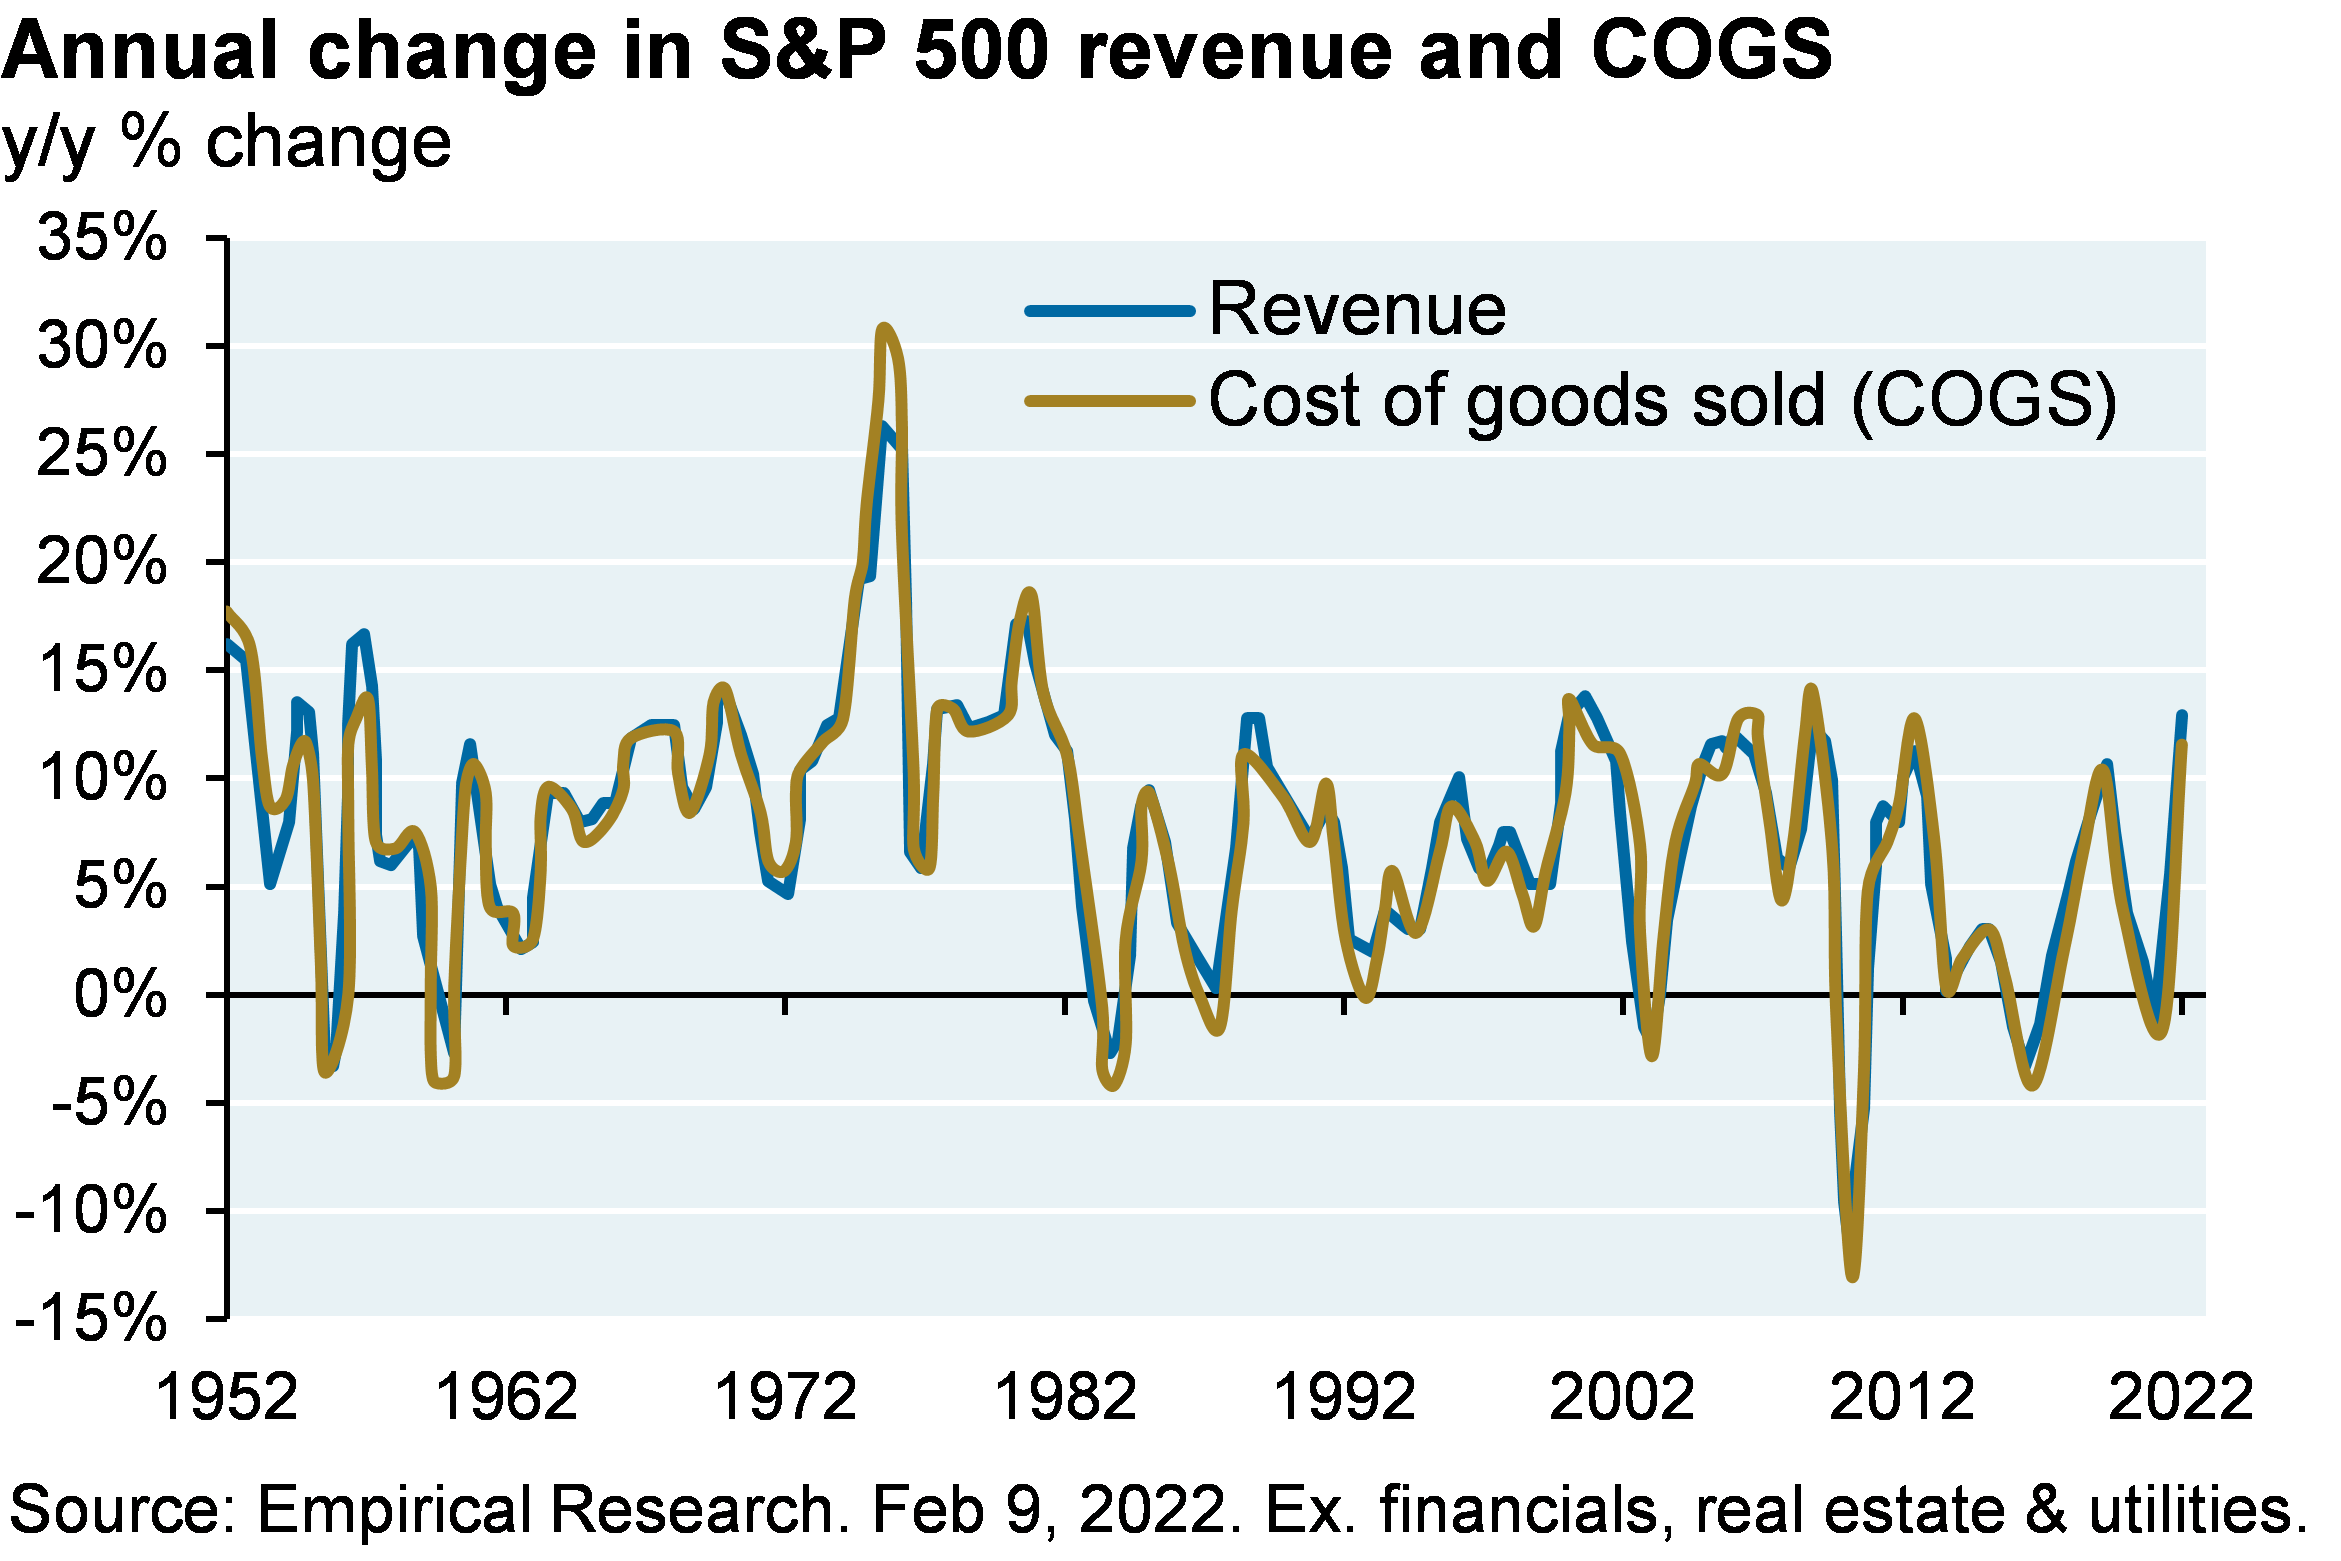 Annual change in S&P 500 revenue and COGS